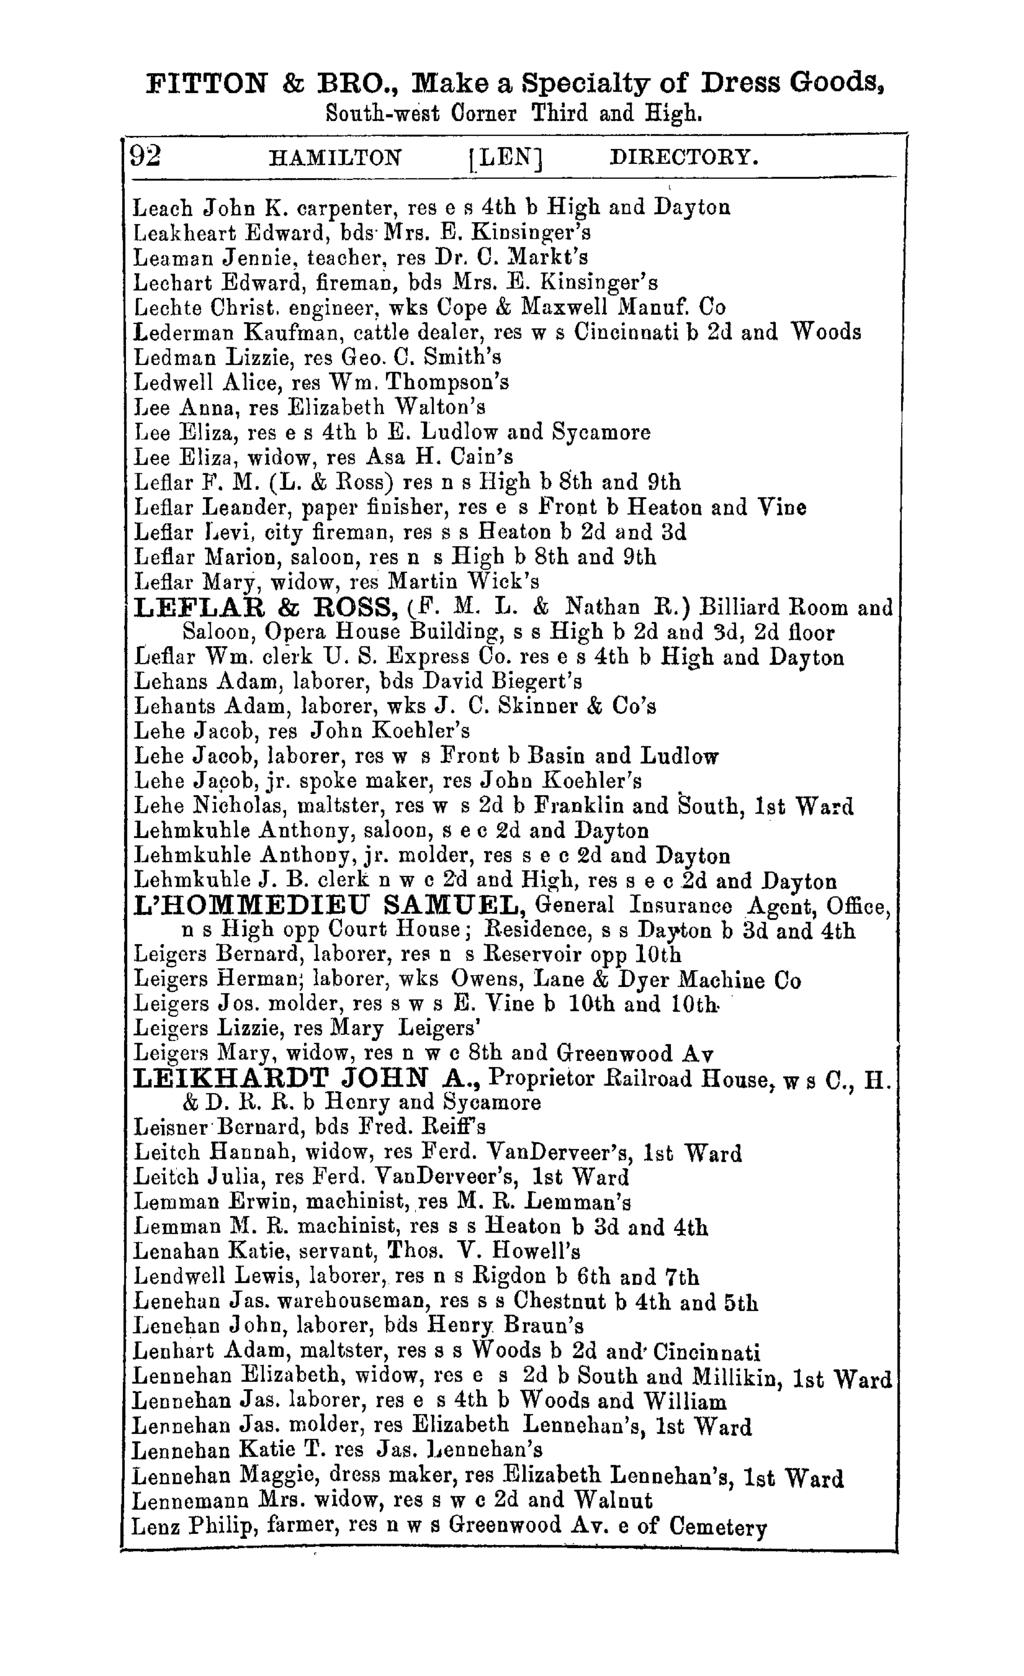 FITTON & BRO., Make a Specialty of Dress Goods, South-west Corner Third and High. 92 HAMILTON LLEN] DIRECTORY. Leach John K. carpenter, res e s 4th b High and Dayton Leakheart Ed